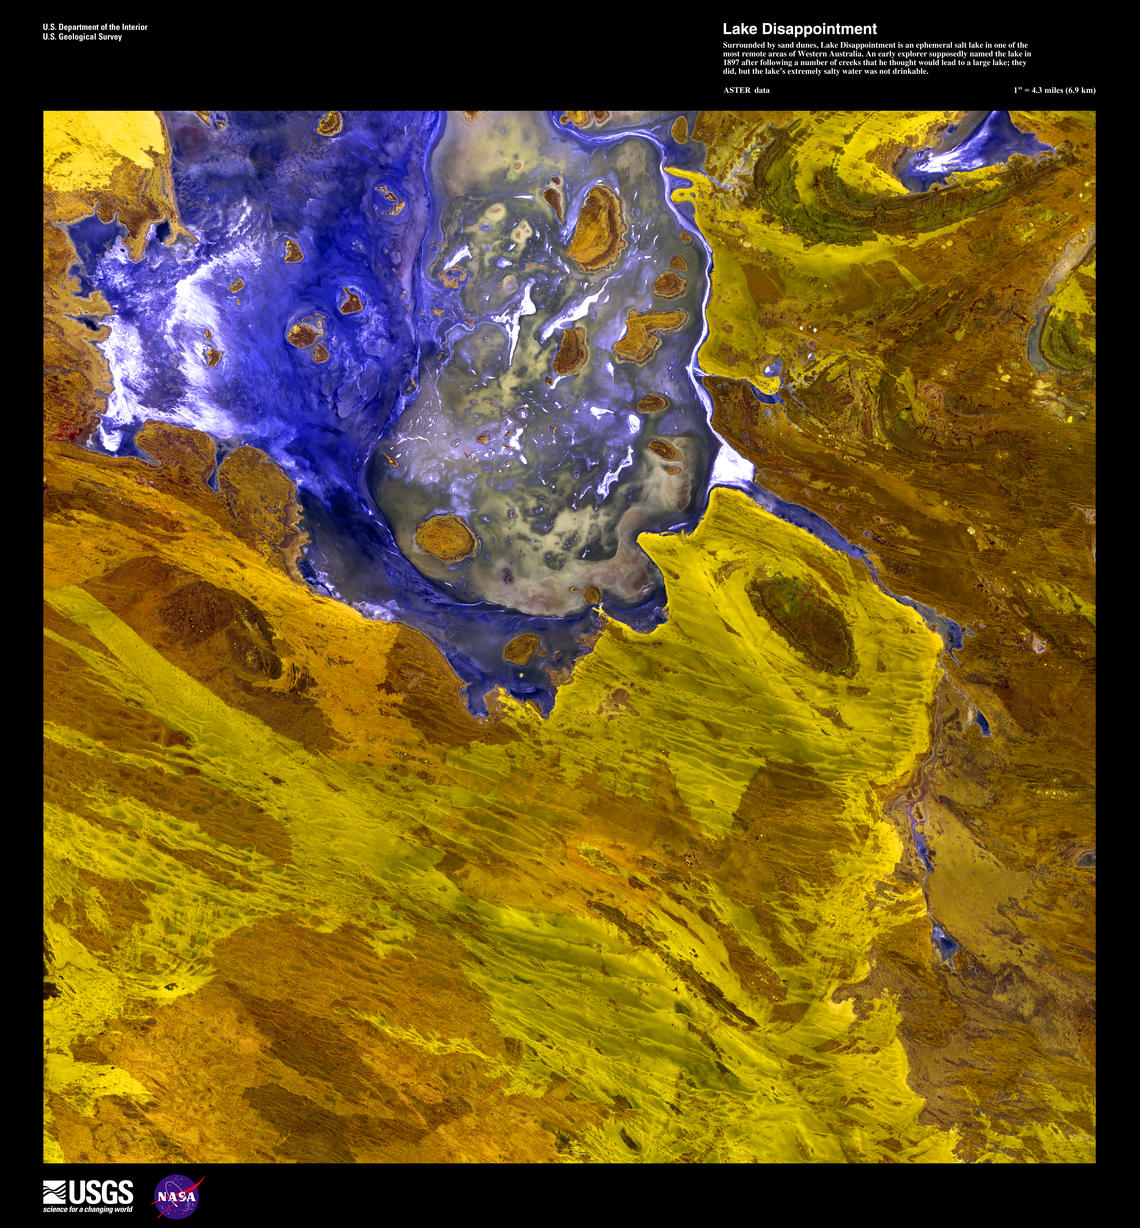 Landsat imagery showing a bright, dark blue lake surrounded by shades of gold.